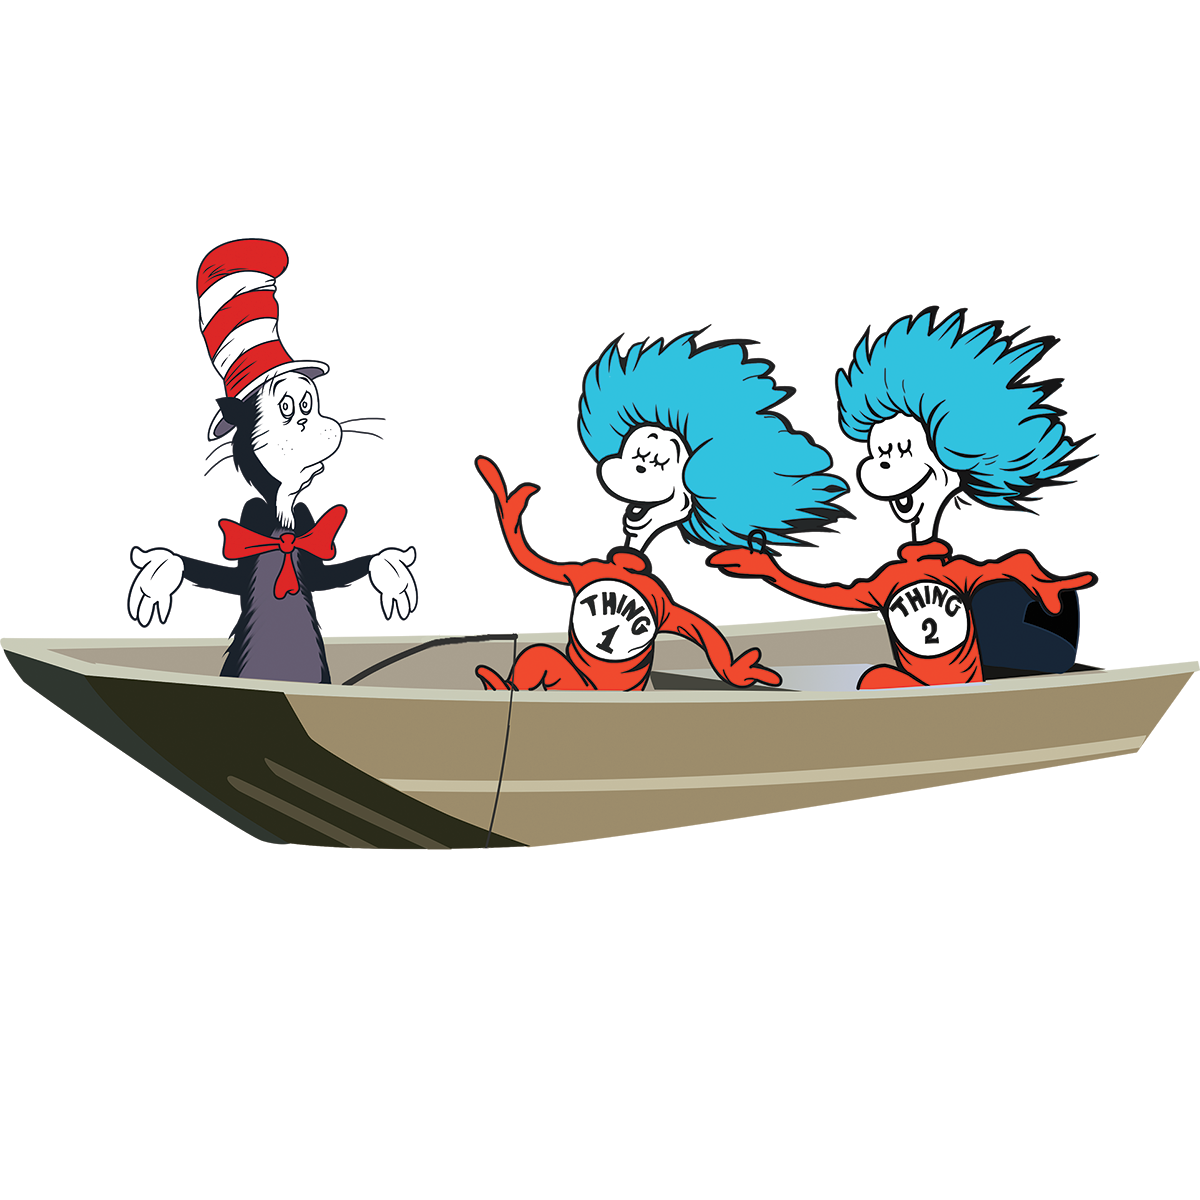 Dr. Seuss, Thing 1 Thing 2 and The Grinch Stole Christmas Fishmas Decal Sticker - Skiff Life